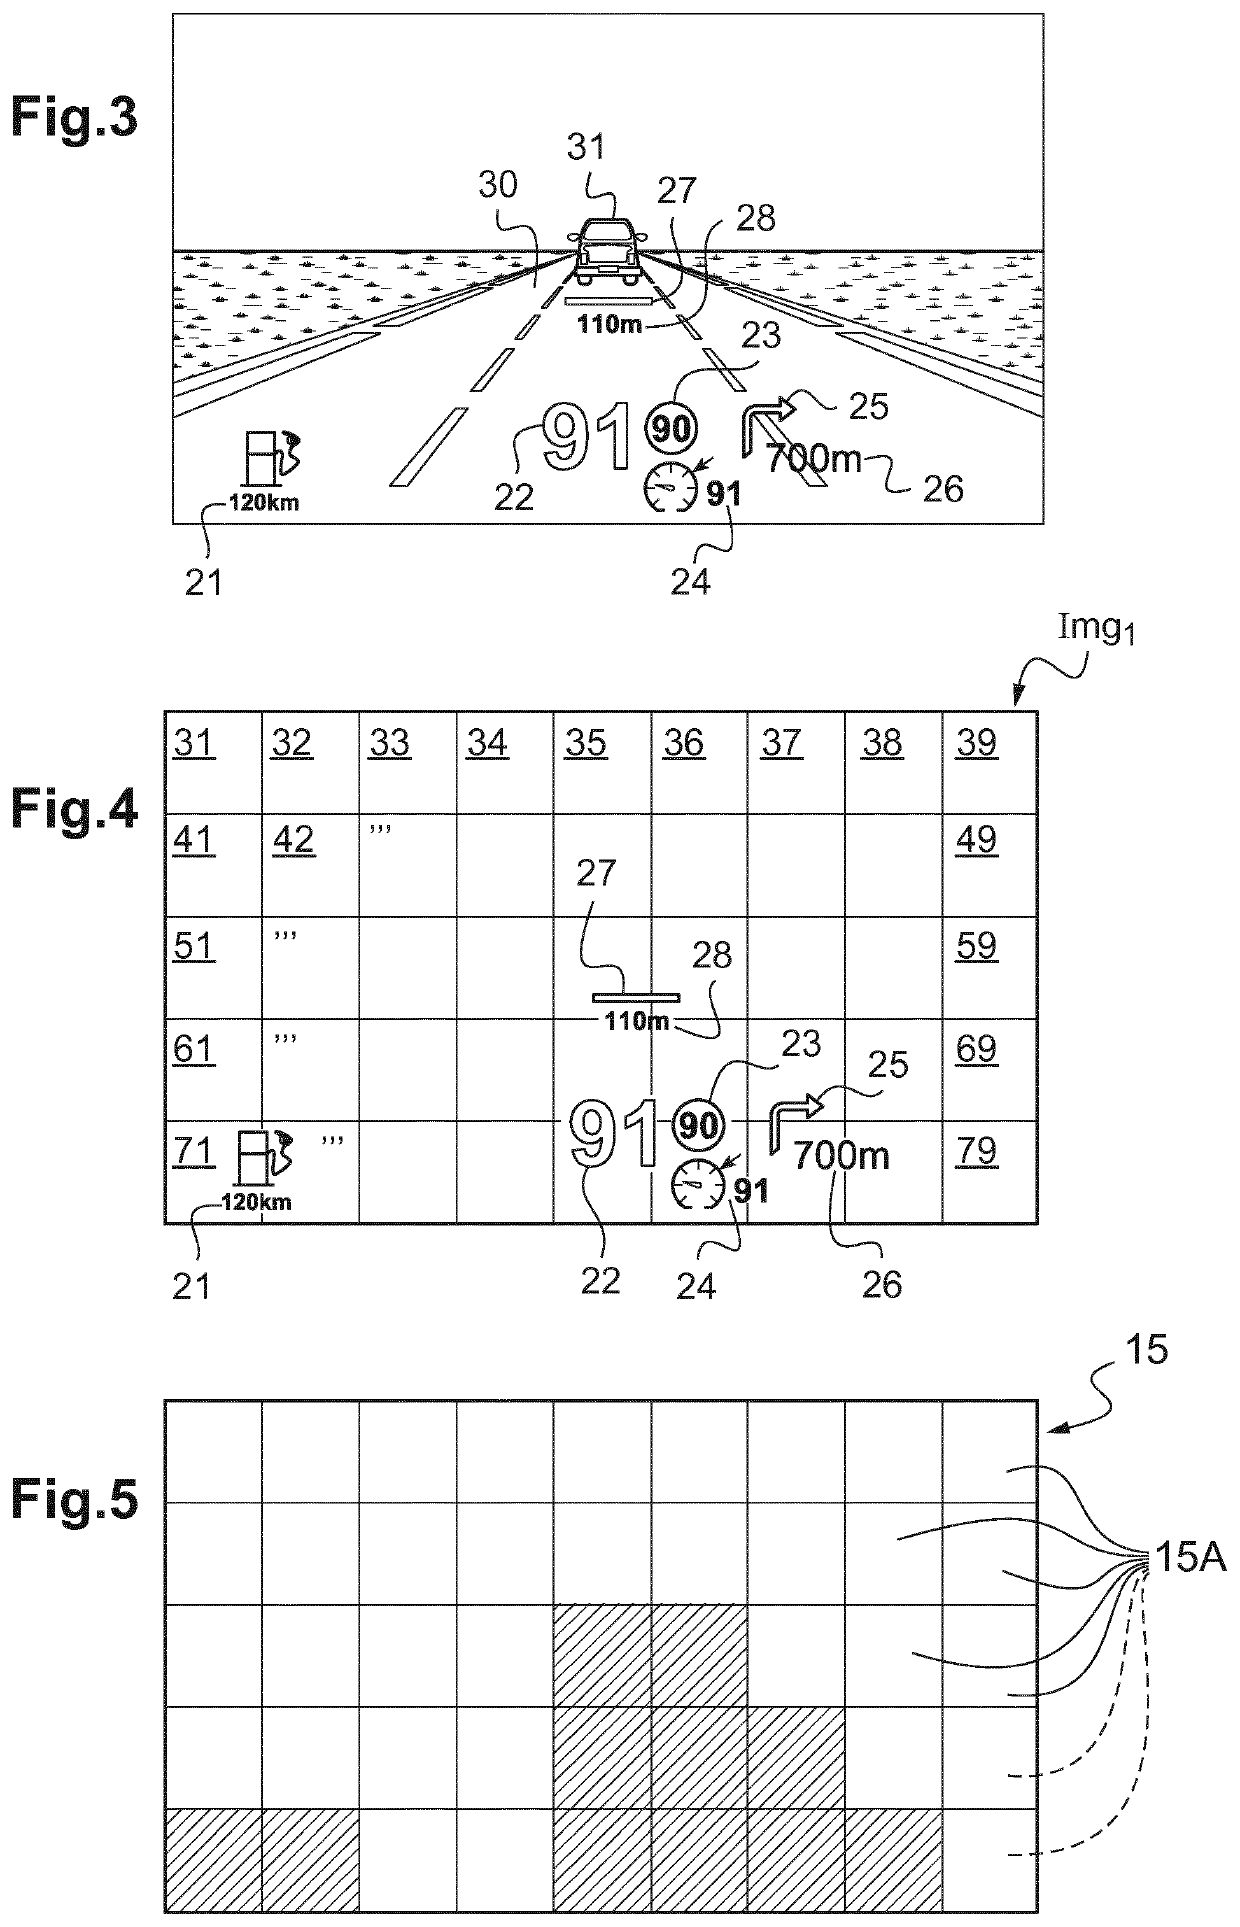 Image-generation device for a head-up display and method for controlling such a device